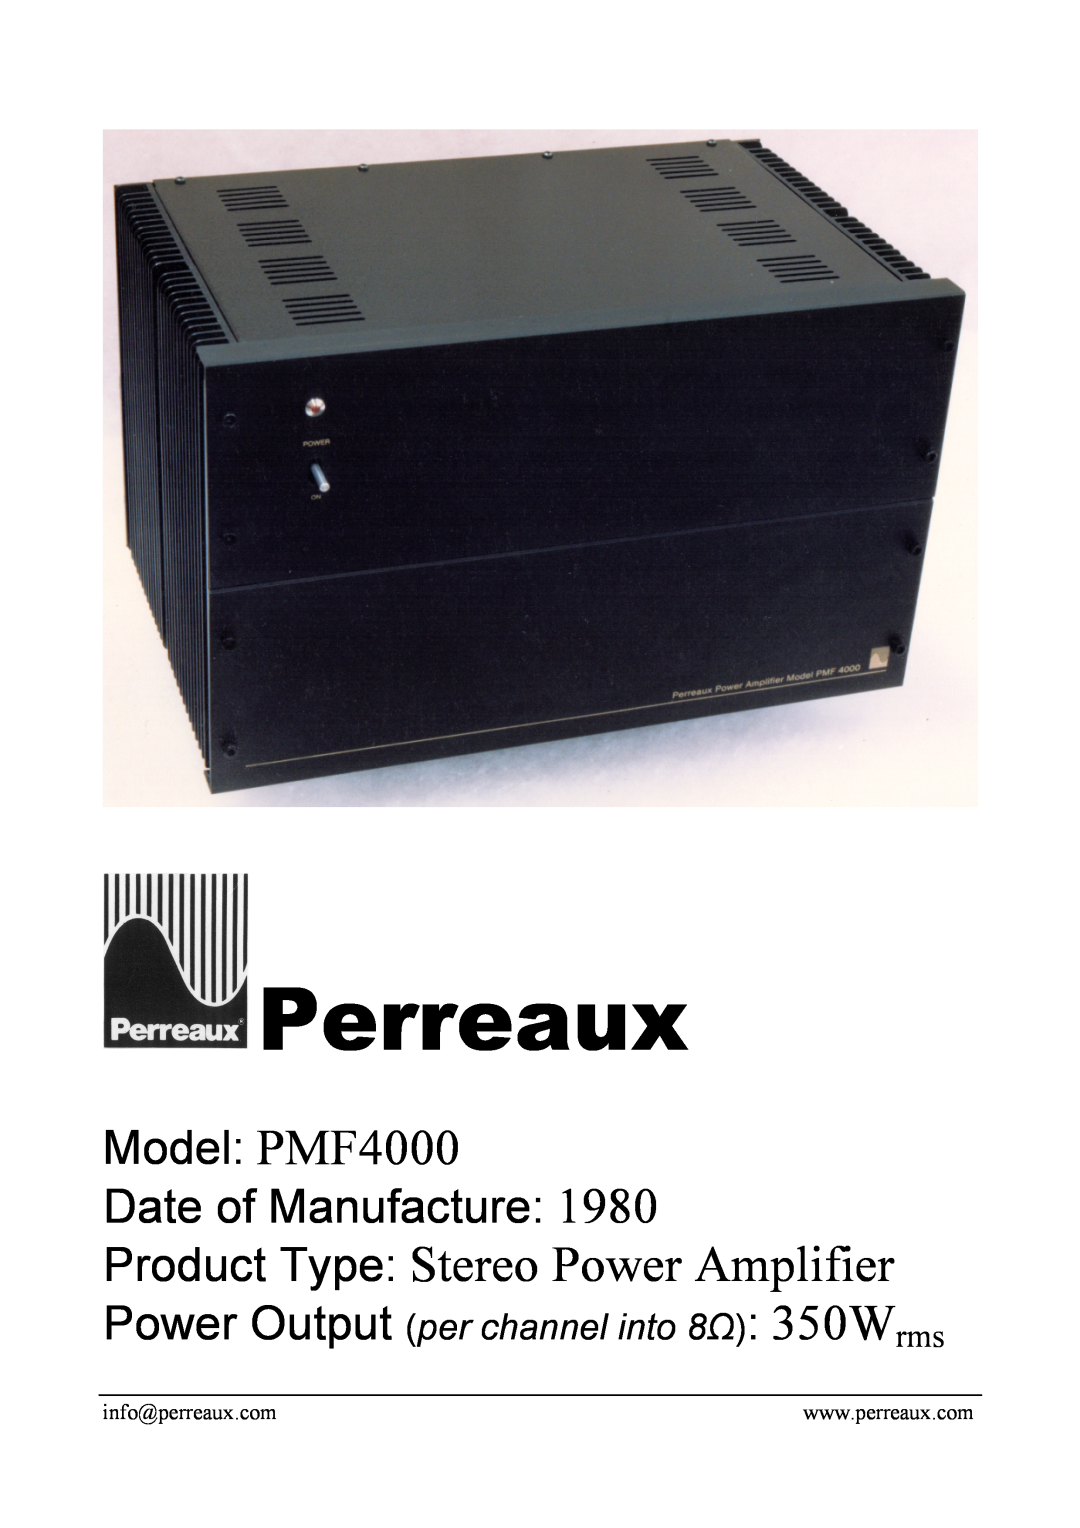 Perreaux manual Perreaux, Product Type Stereo Power Amplifier, Model PMF4000 Date of Manufacture 